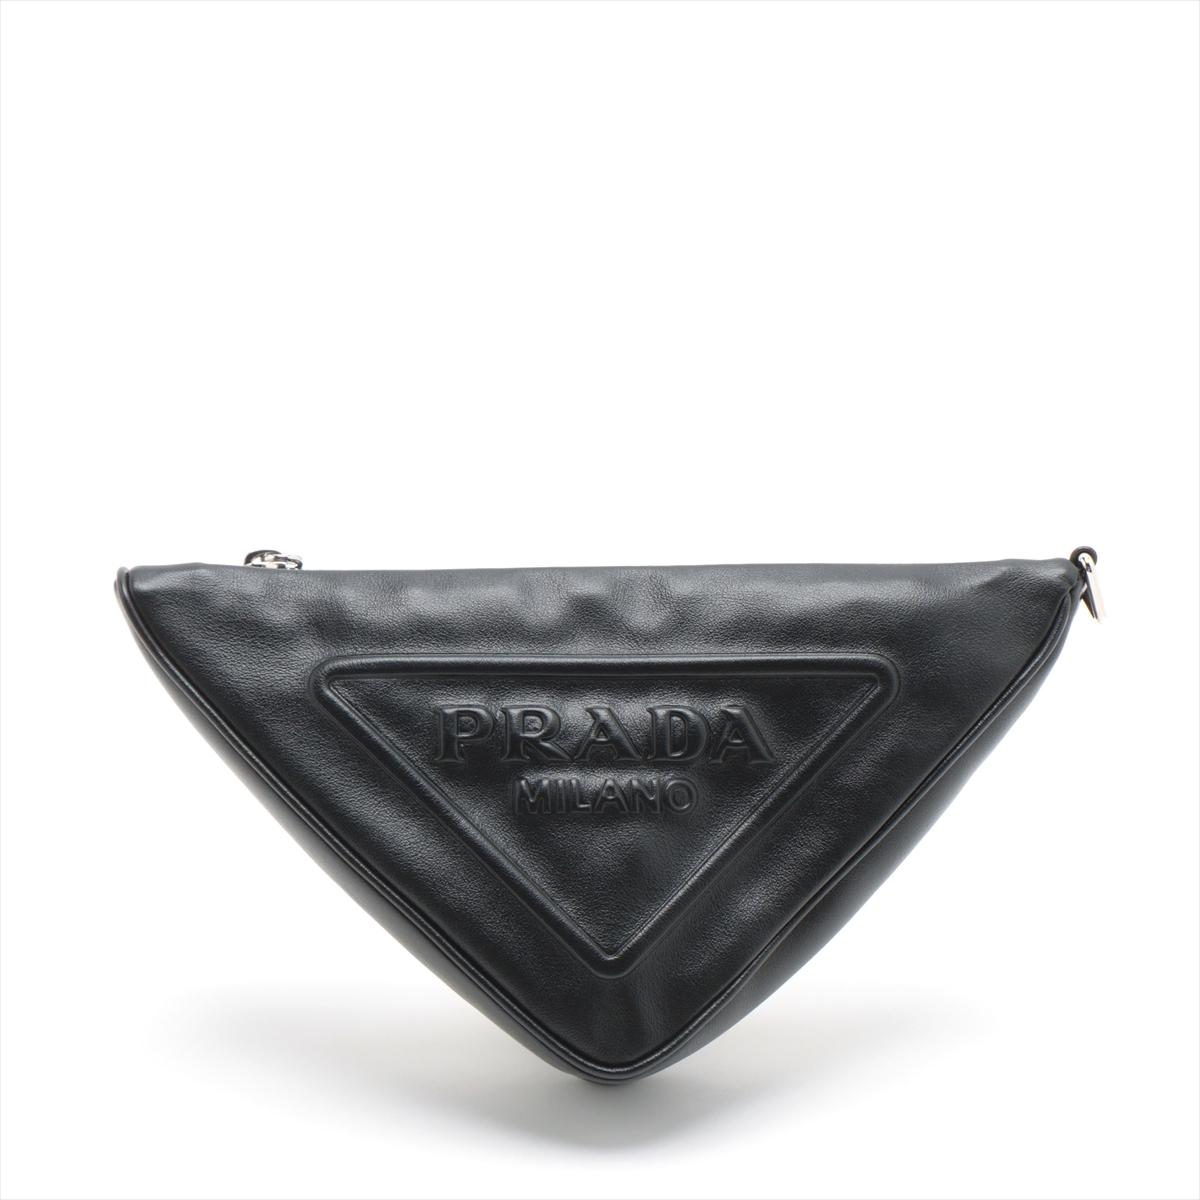 The Prada Triangle Leather Clutch Bag in Black is a sleek and modern accessory that effortlessly combines contemporary design with Prada's timeless elegance. Meticulously crafted, the clutch features a distinctive triangular shape, showcasing the